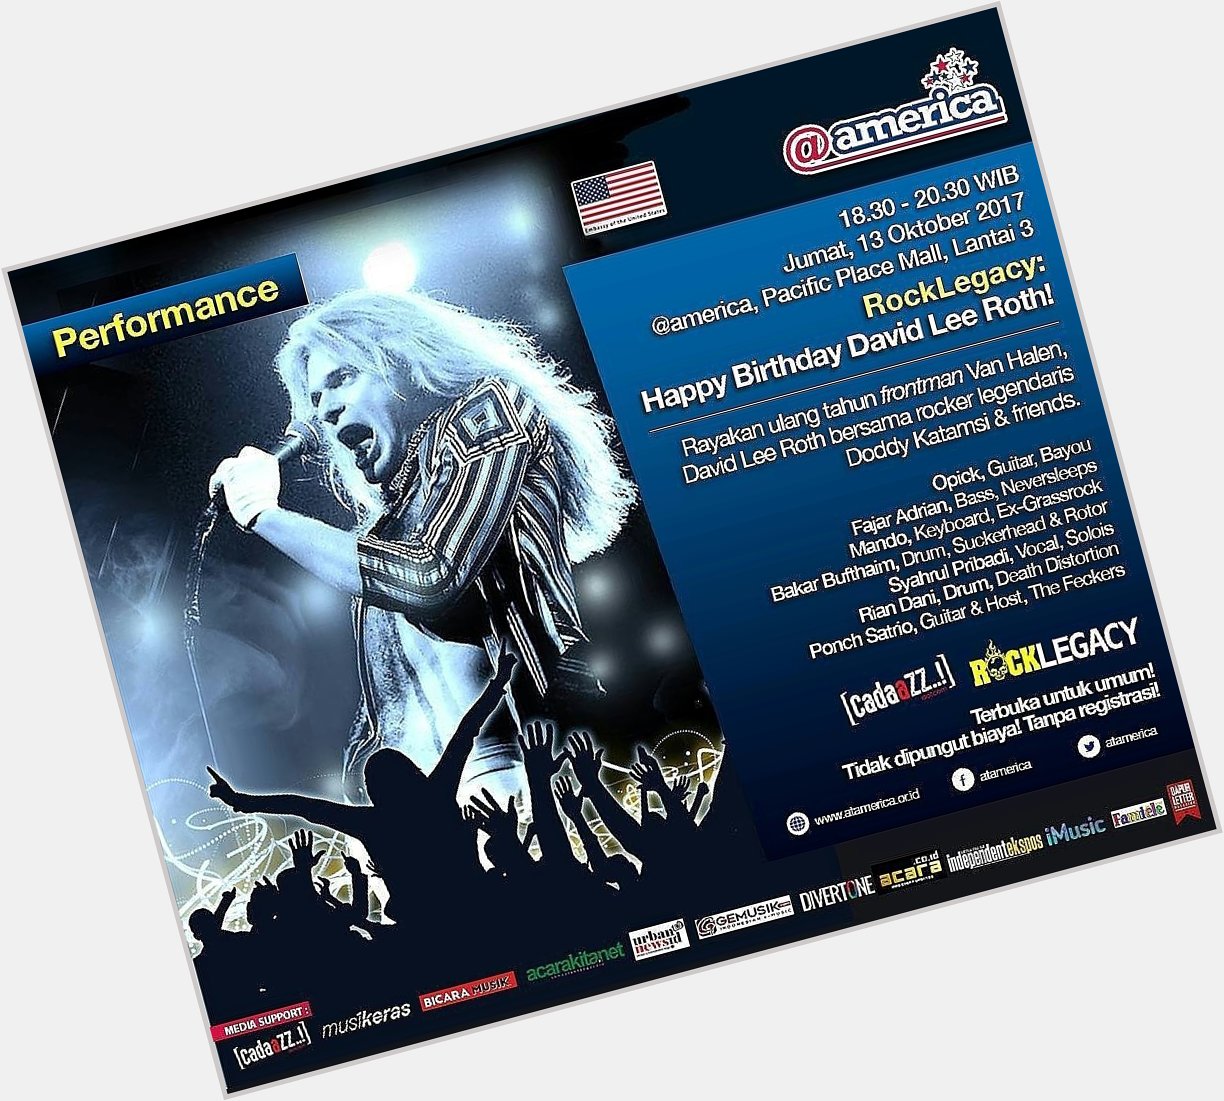 Saksikan Event Live Music Concert \"ROCK LEGACY : HAPPY BIRTHDAY DAVID LEE ROTH WITH DODDY KATAMSI AND FRIENDS\" 